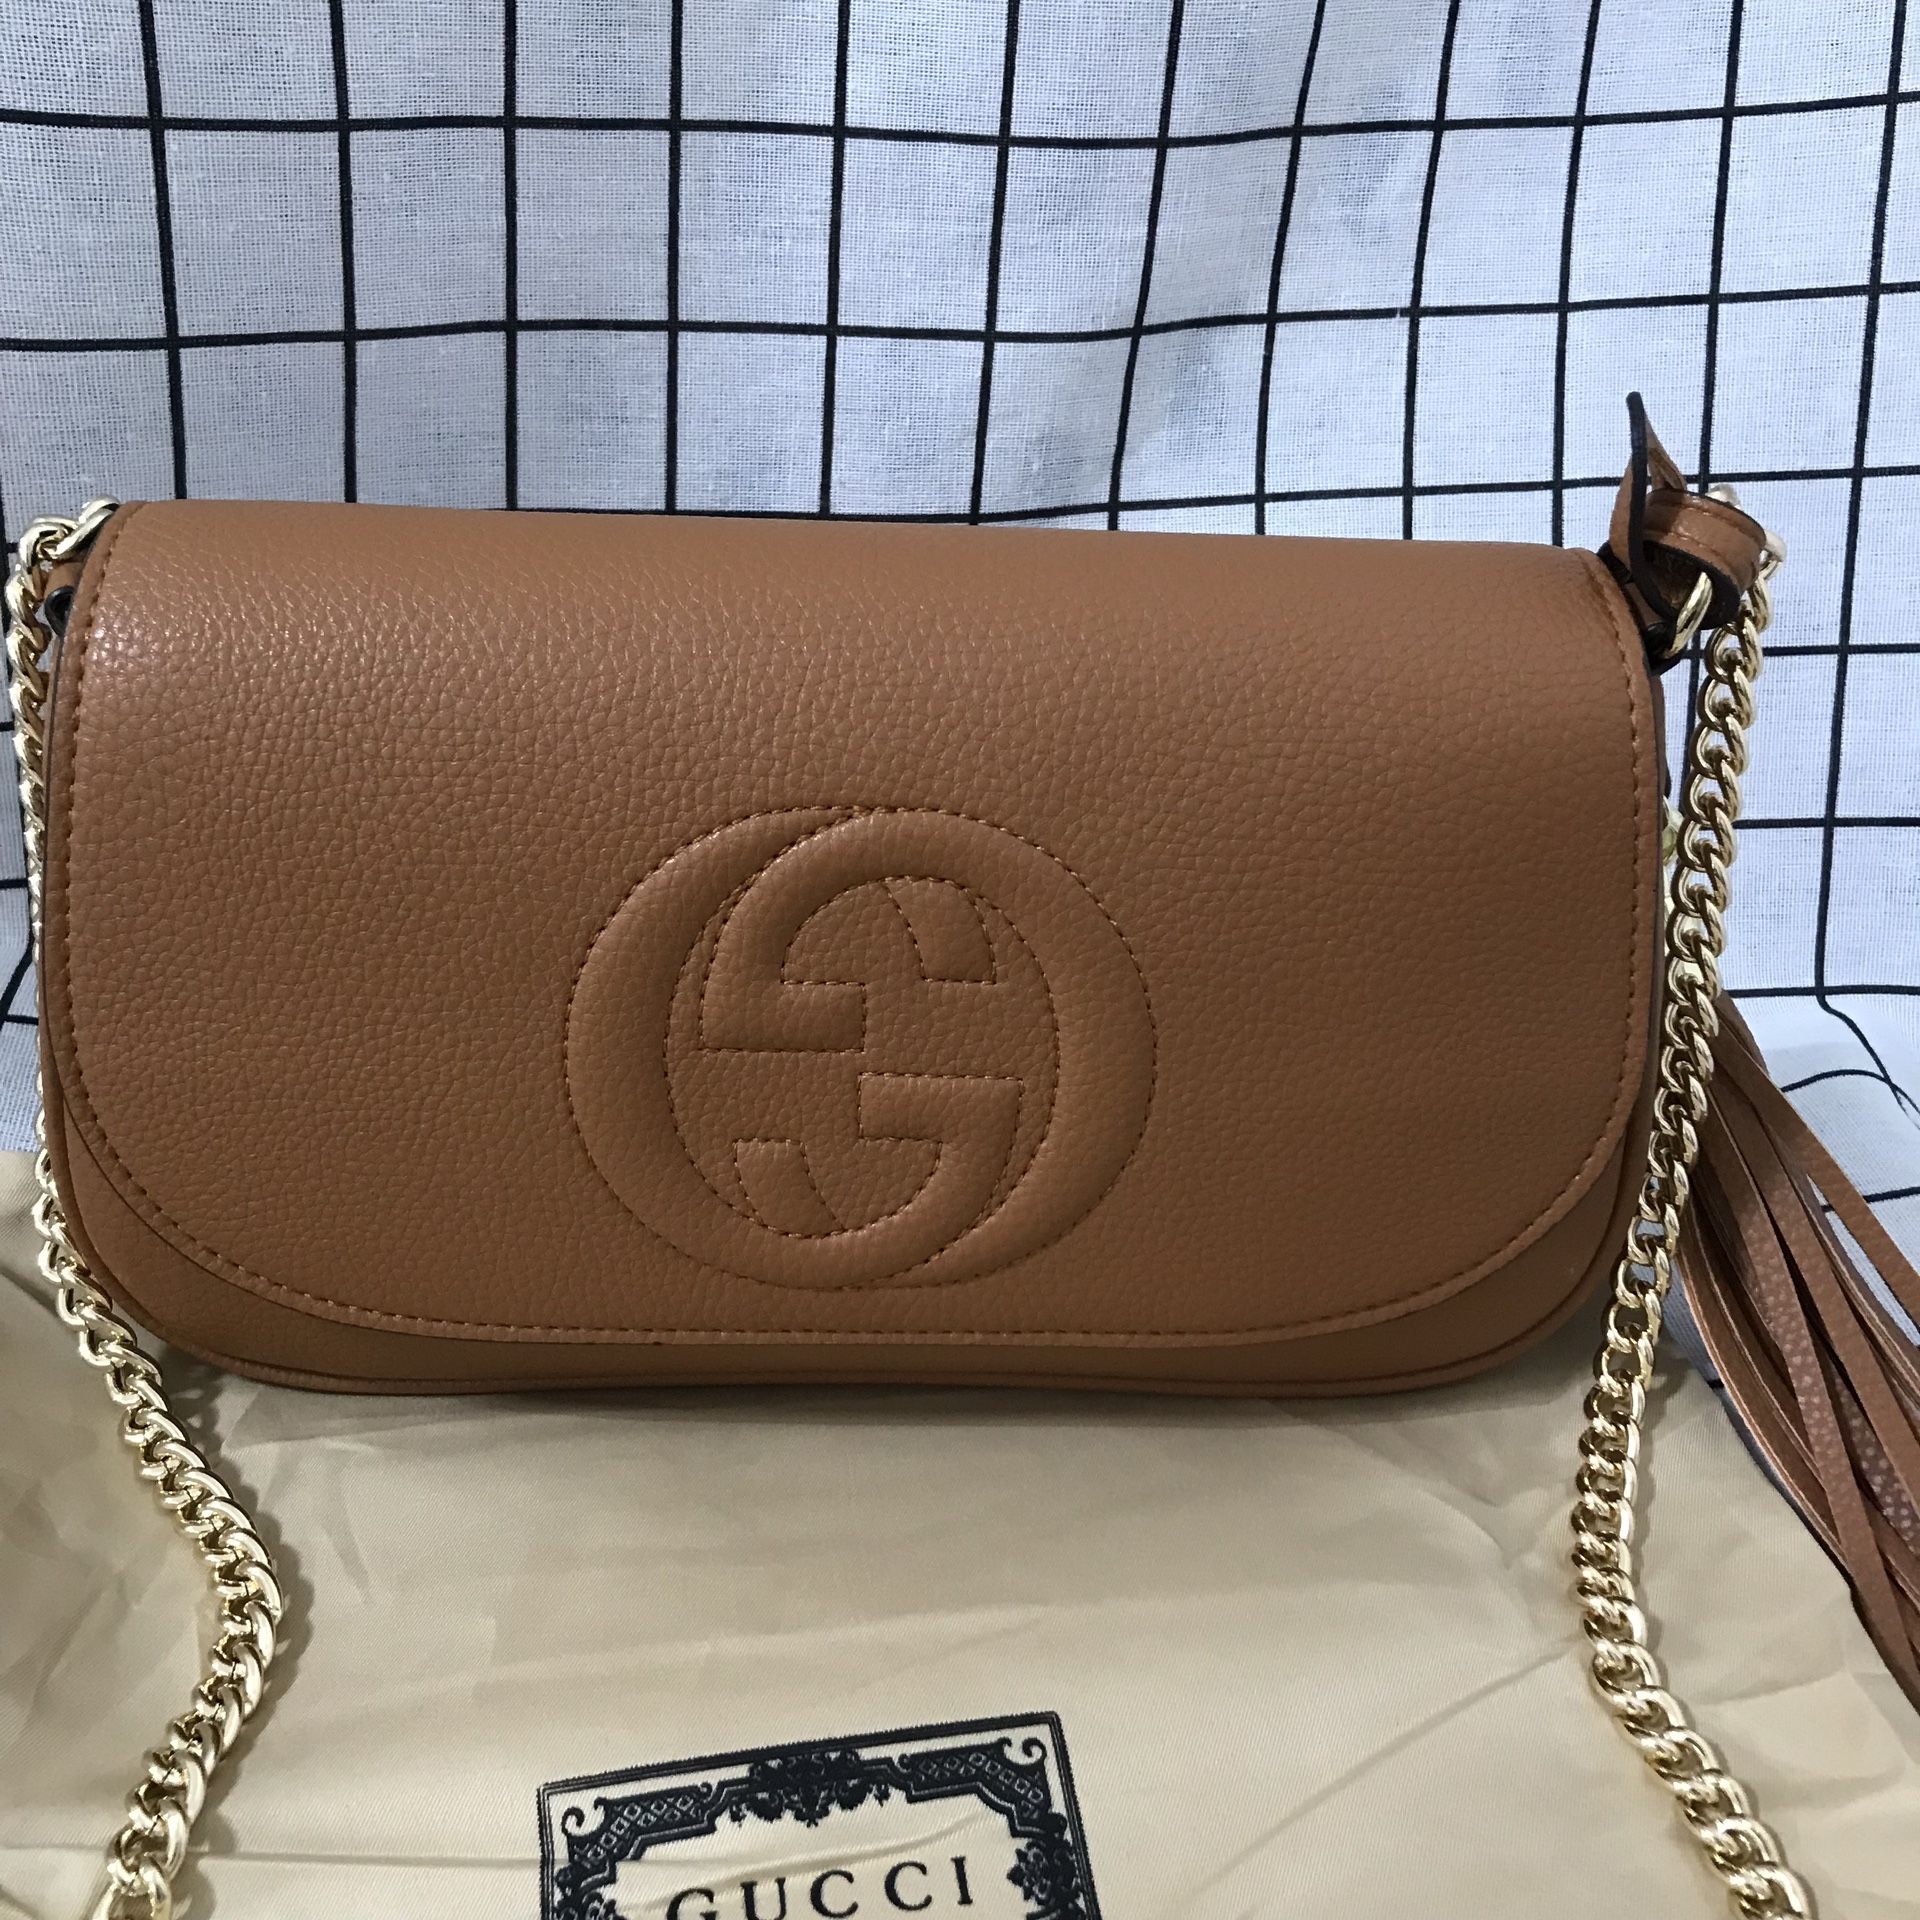 tale Sympatisere Lav en snemand Authentic Gucci Bags Caspian Tassel Chain Cross Body Bag for Sale in New  York, NY - OfferUp